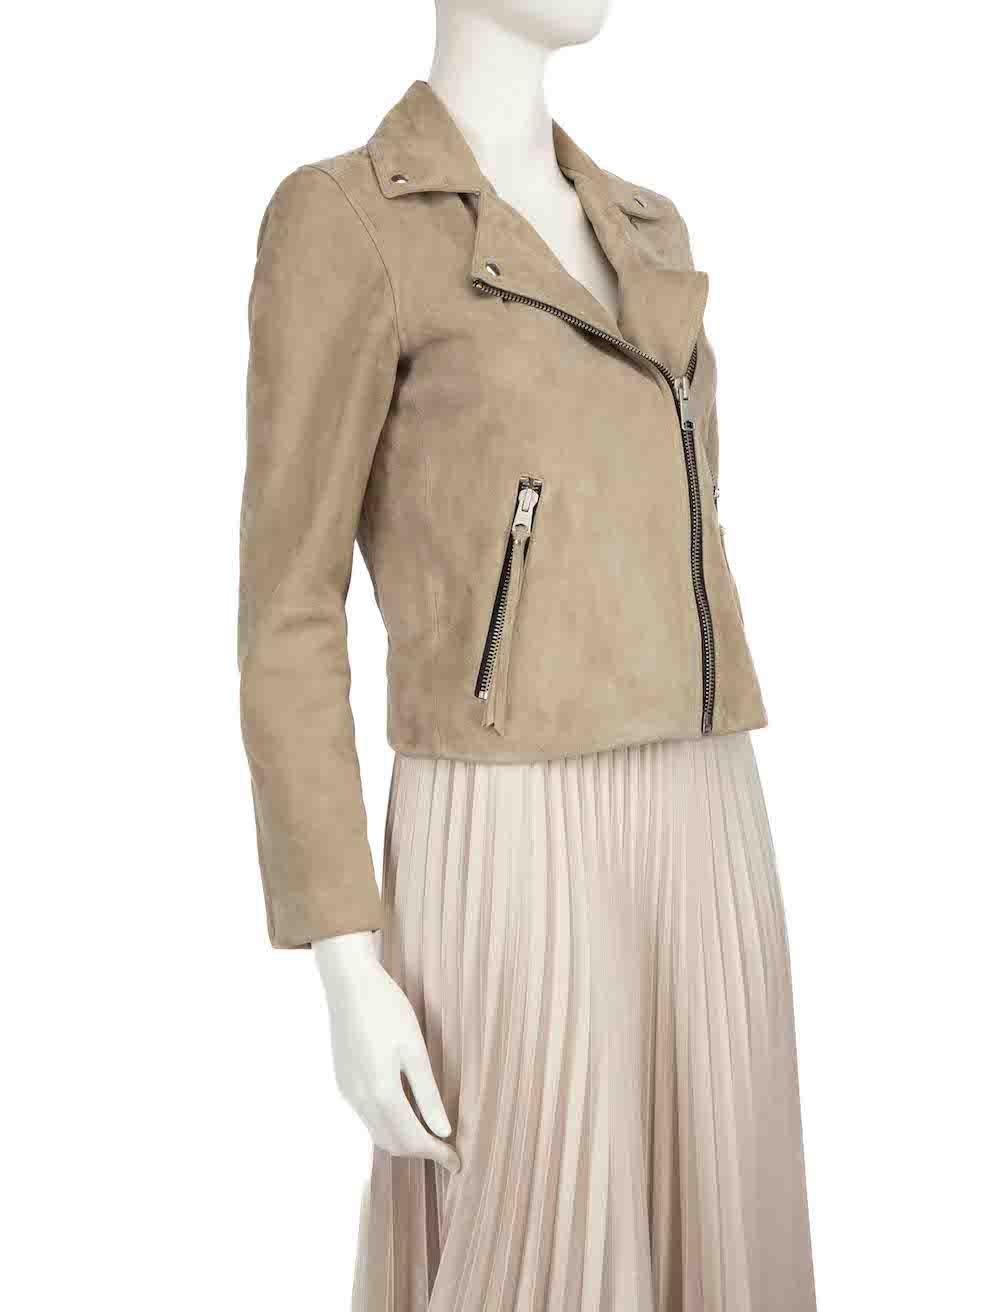 CONDITION is Good. General wear to jacket is evident. Moderate signs of wear to the front and both sleeves with discoloured marks and abrasions to the suede on this used All Saints designer resale item.
 
 
 
 Details
 
 
 Dalby model
 
 Beige
 
